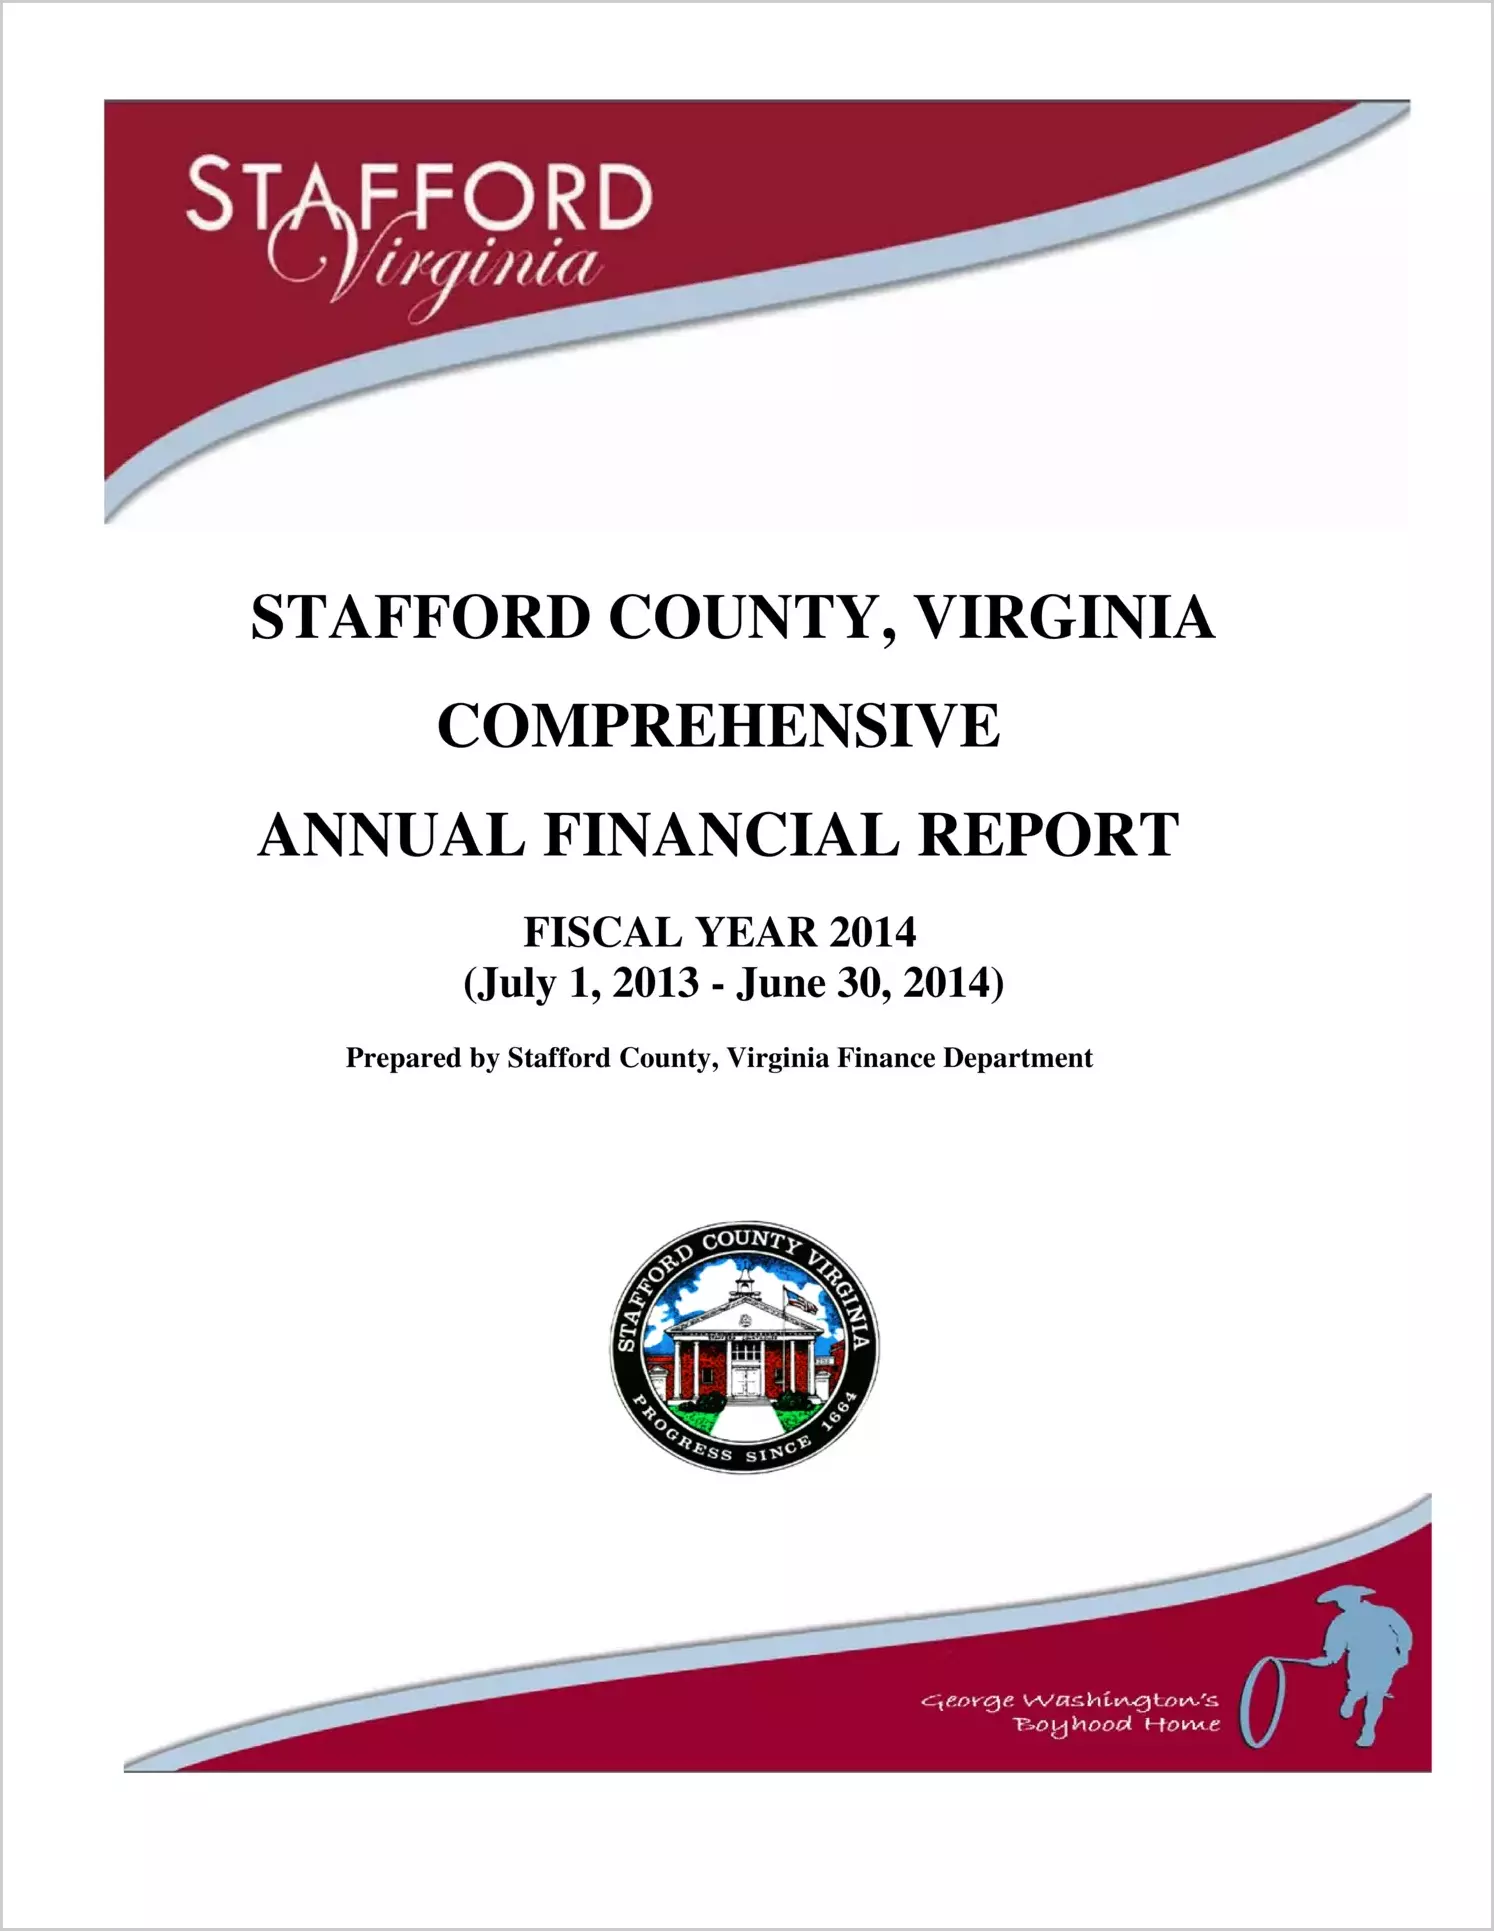 2014 Annual Financial Report for County of Stafford